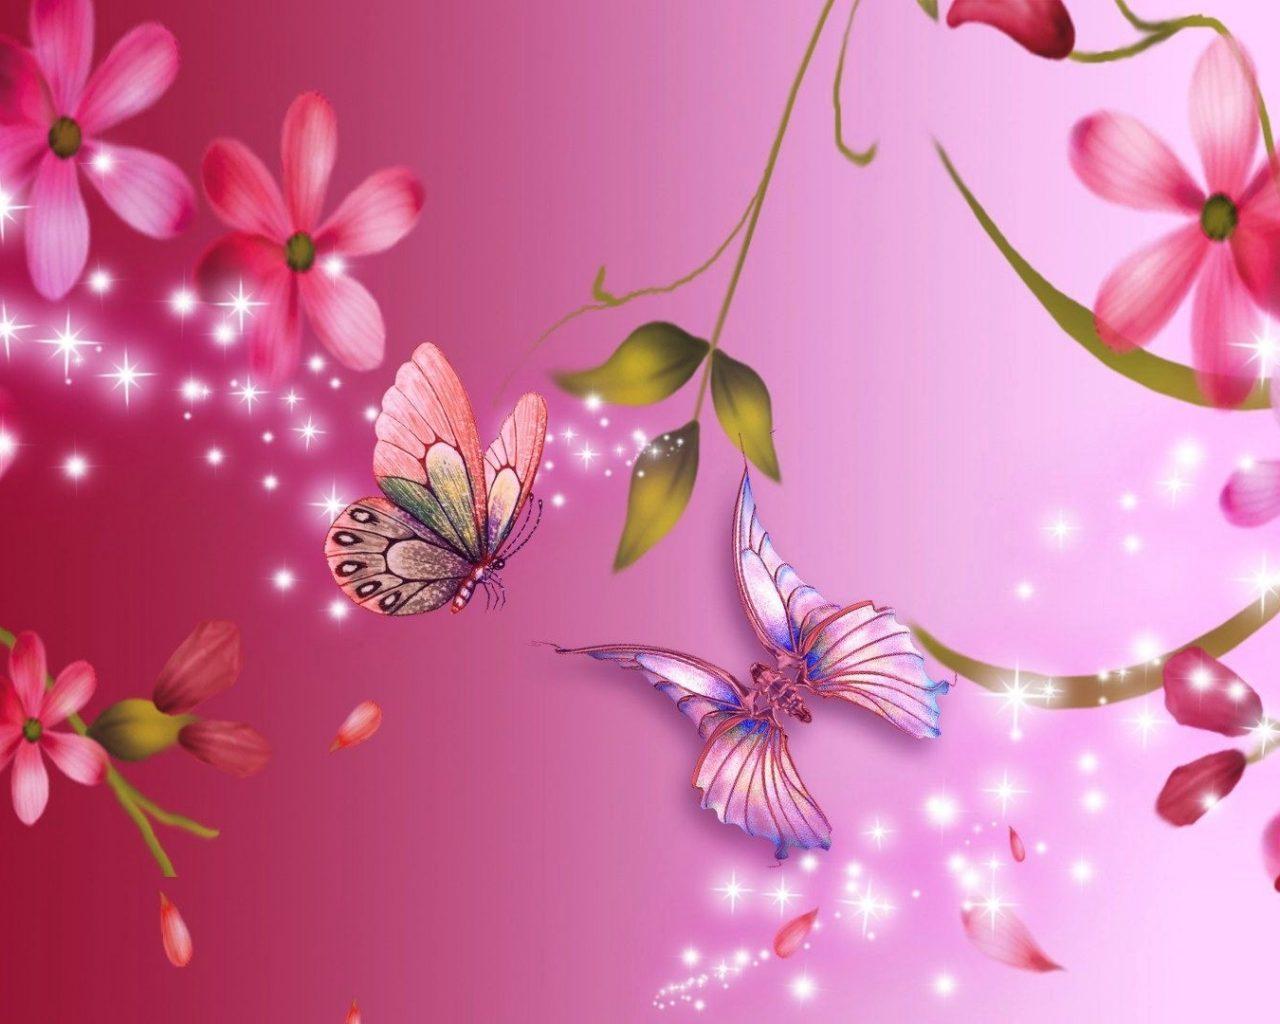 Abstract Spring Flowers Wallpapers - Top Free Abstract Spring Flowers ...